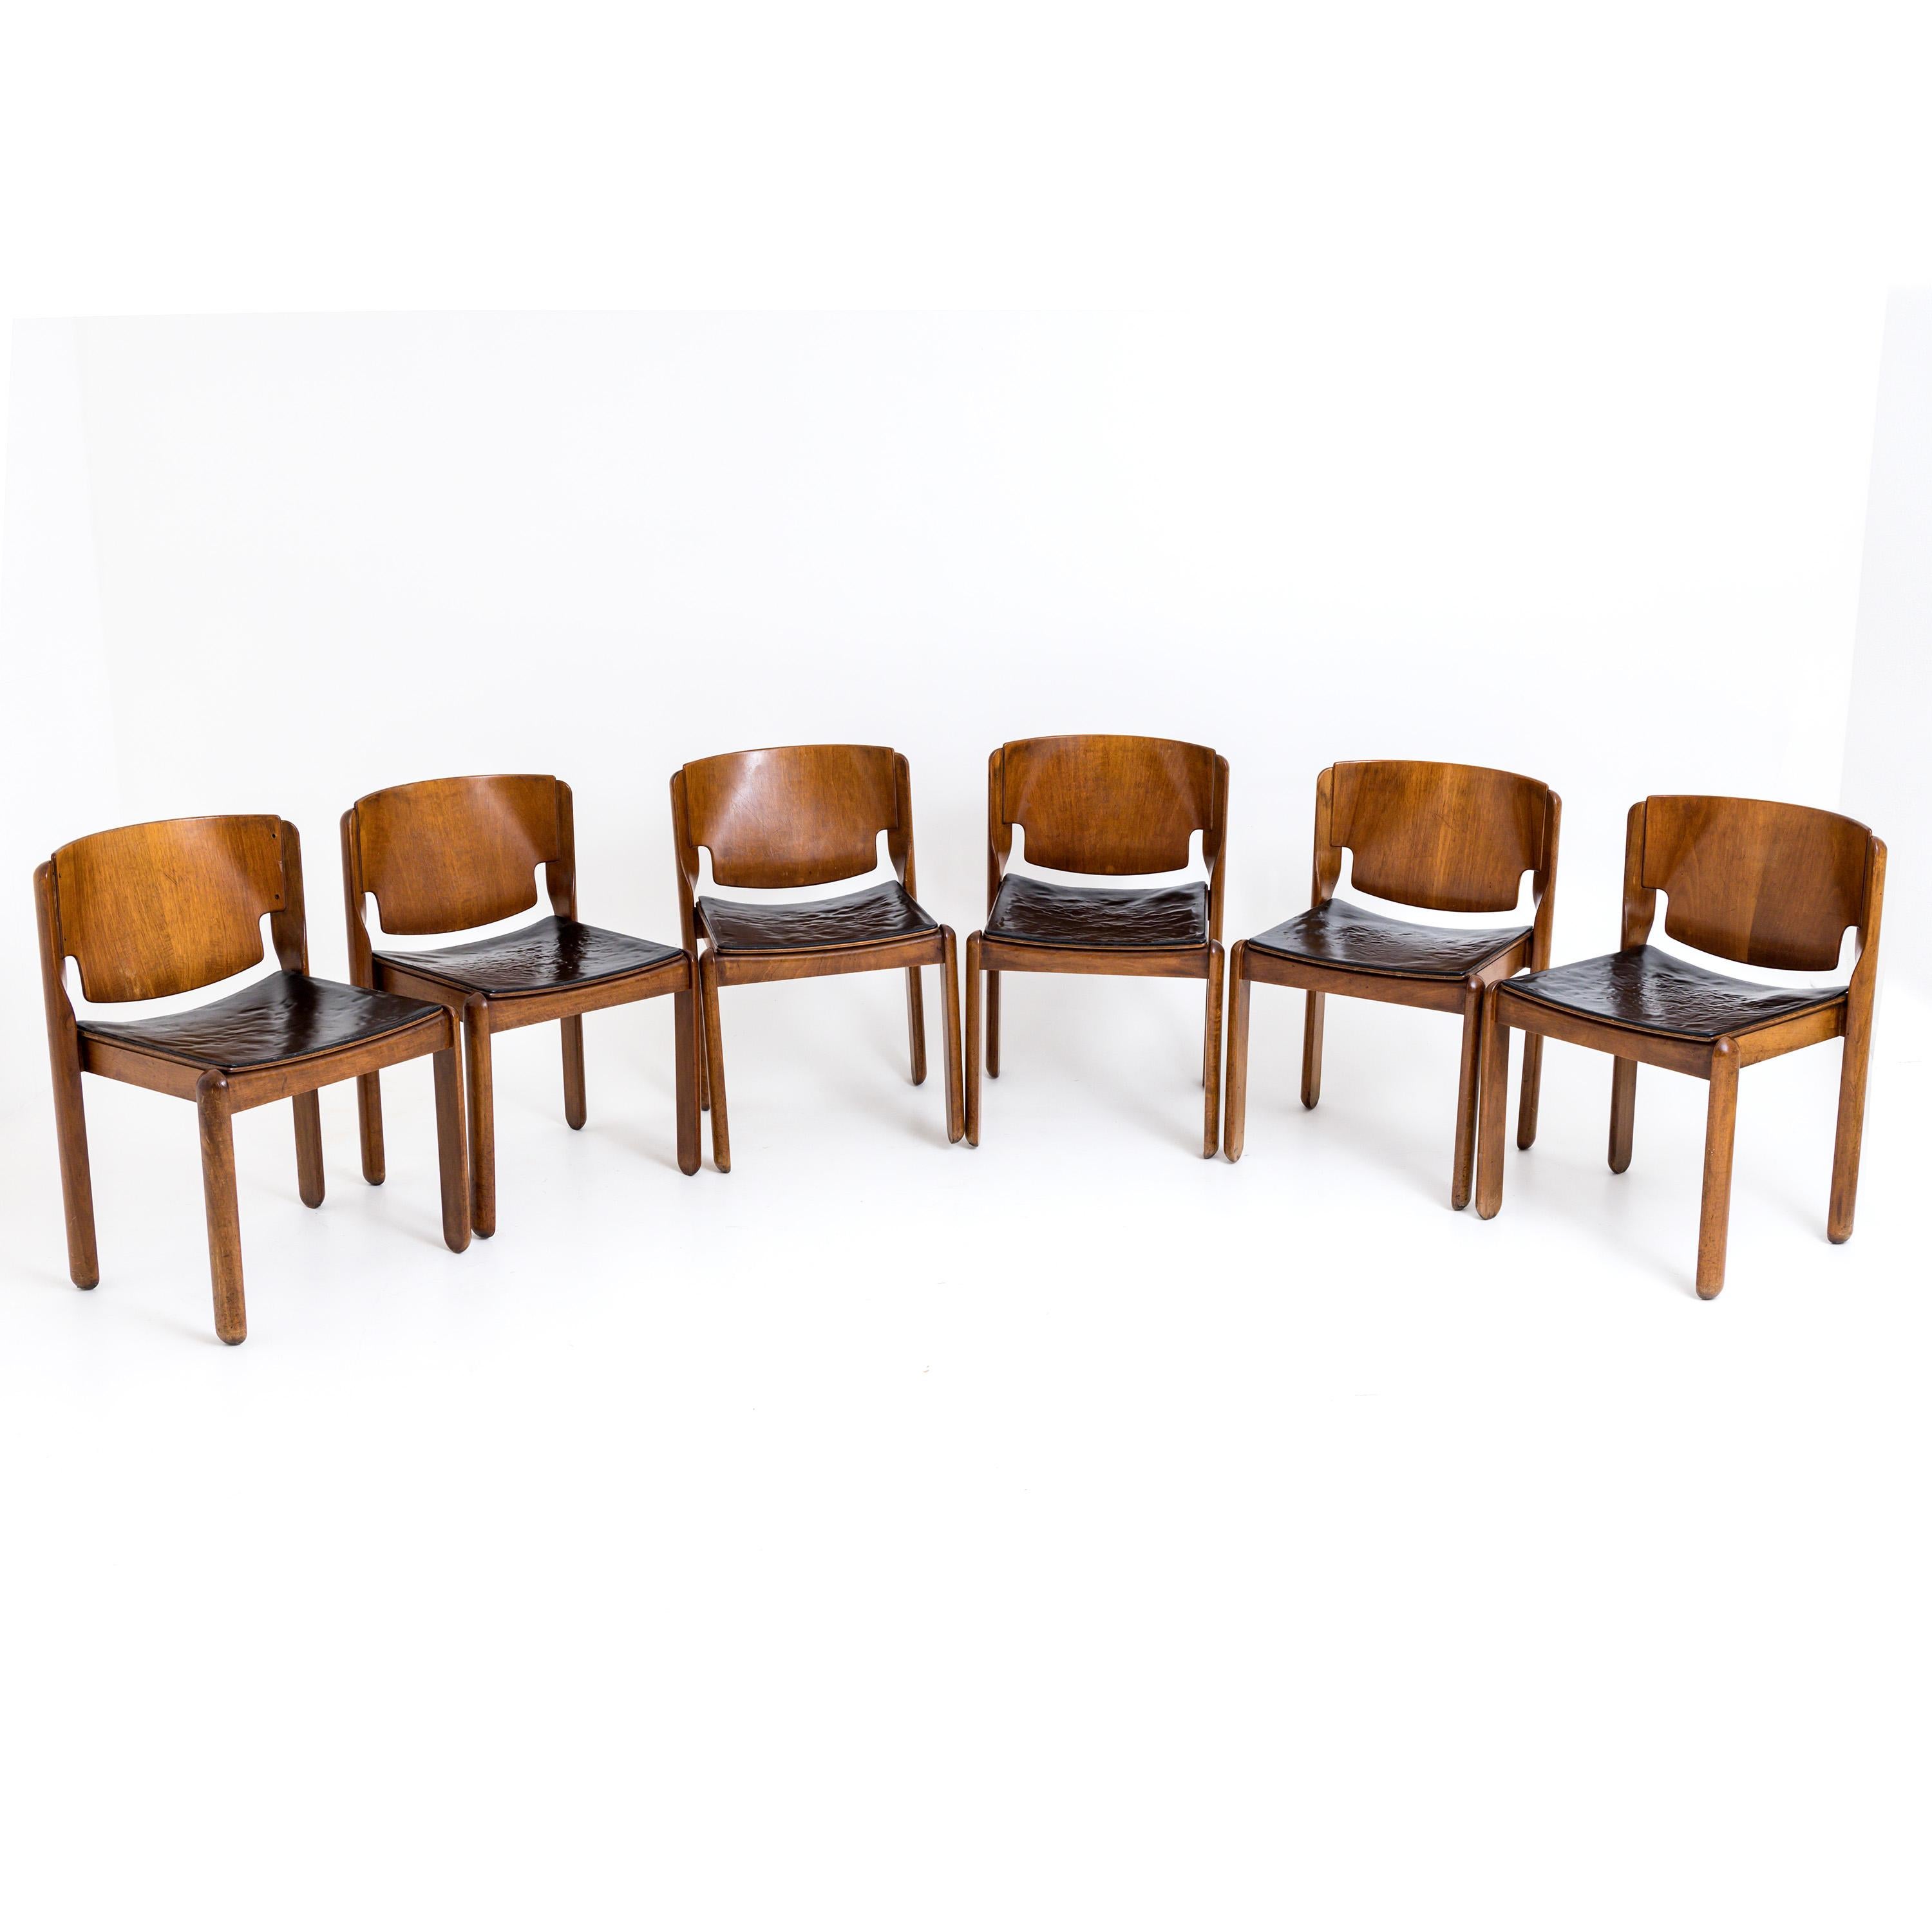 Set of six Vico Magistretti chairs, model 122 designed for Cassina in the 1960s. The seats are covered with brown leather.